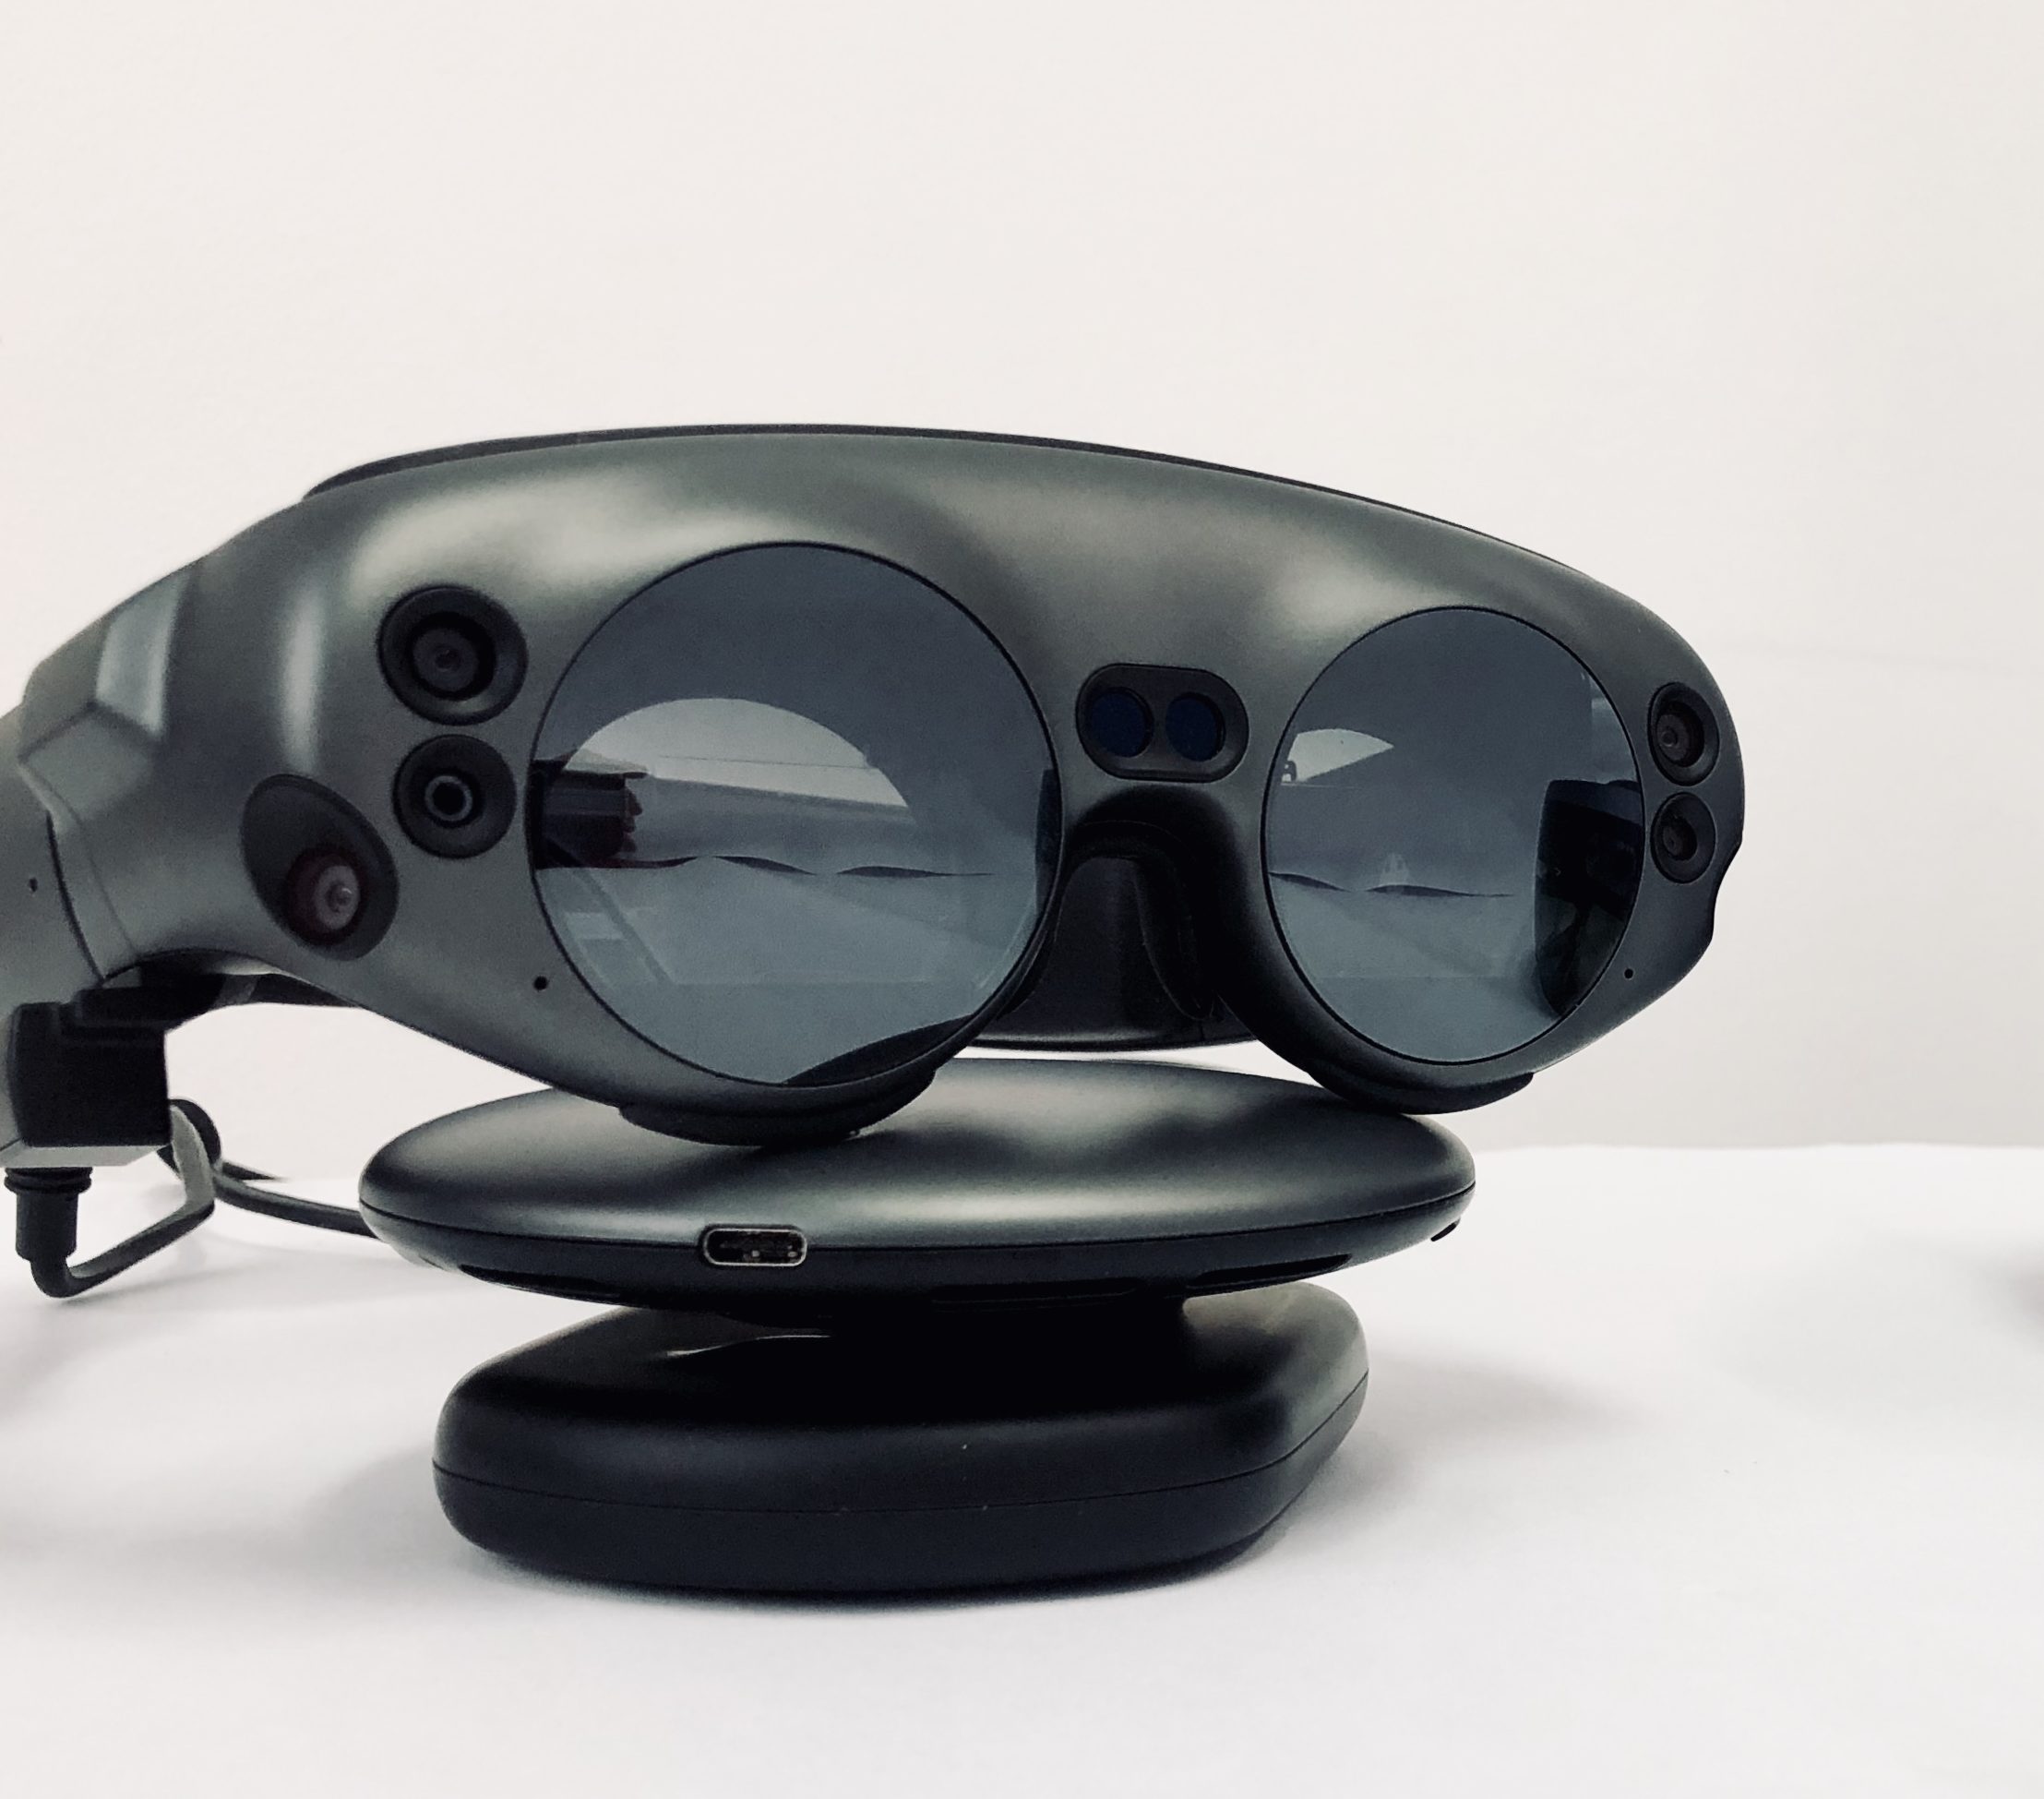 magic leap - is your business ready?